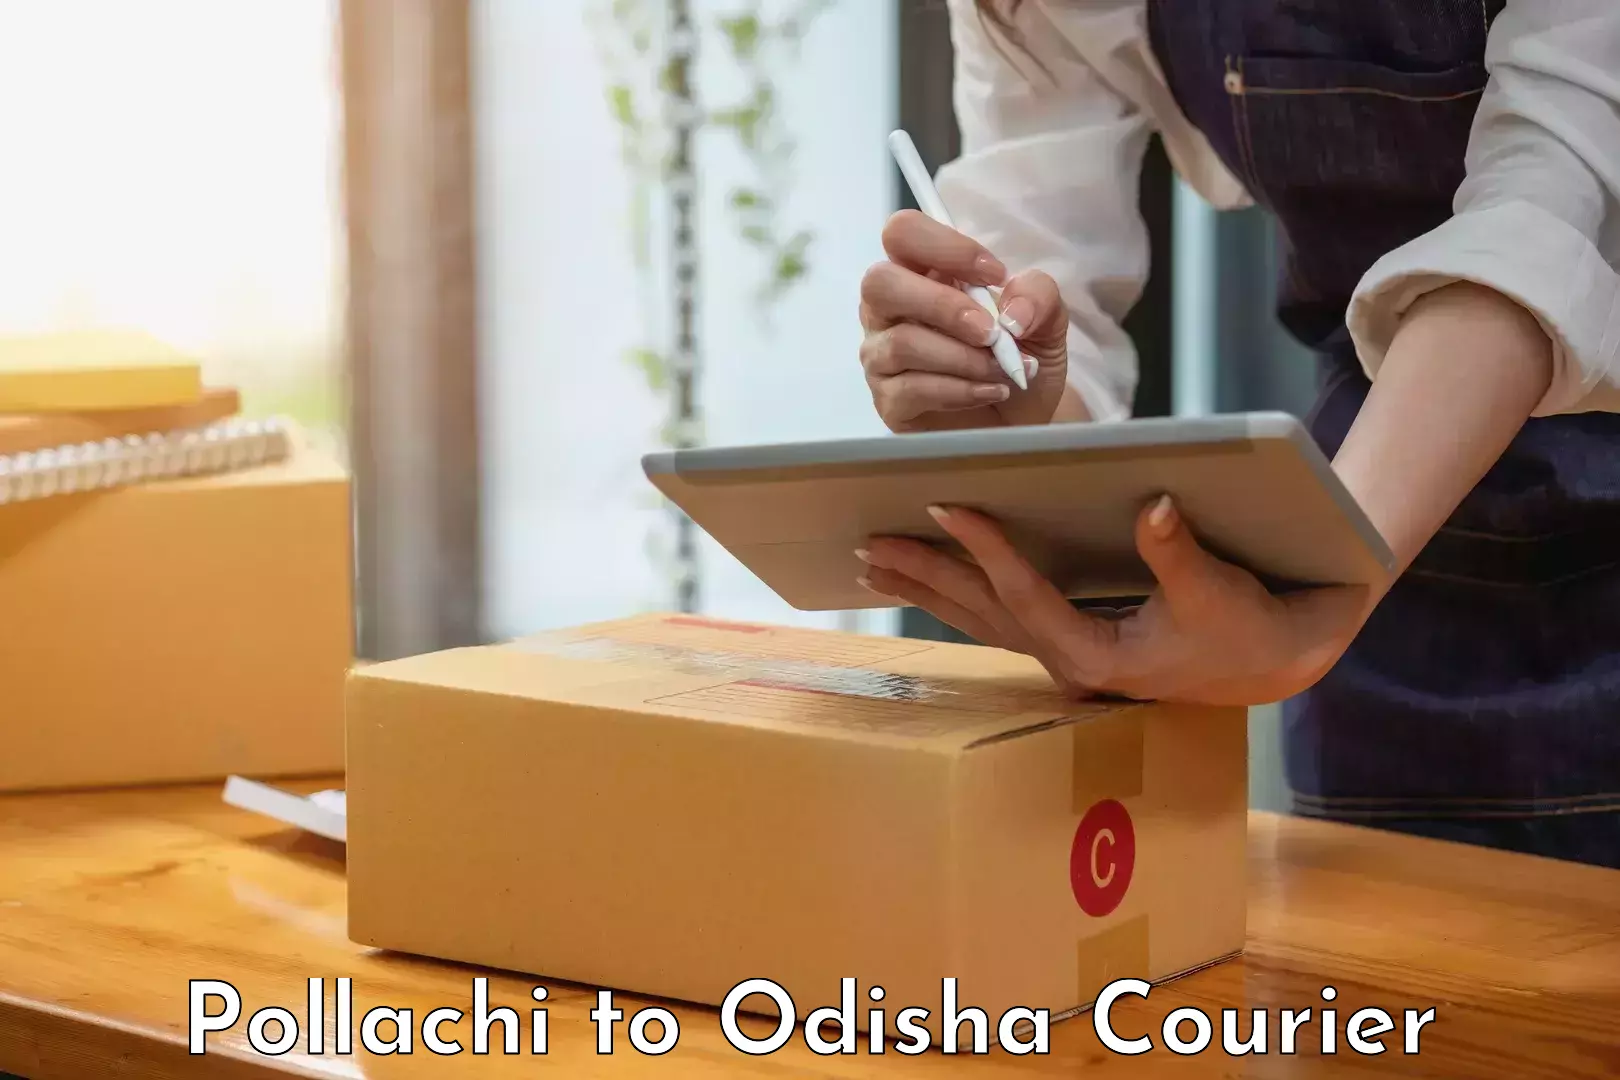 Urgent courier needs Pollachi to Paradip Port